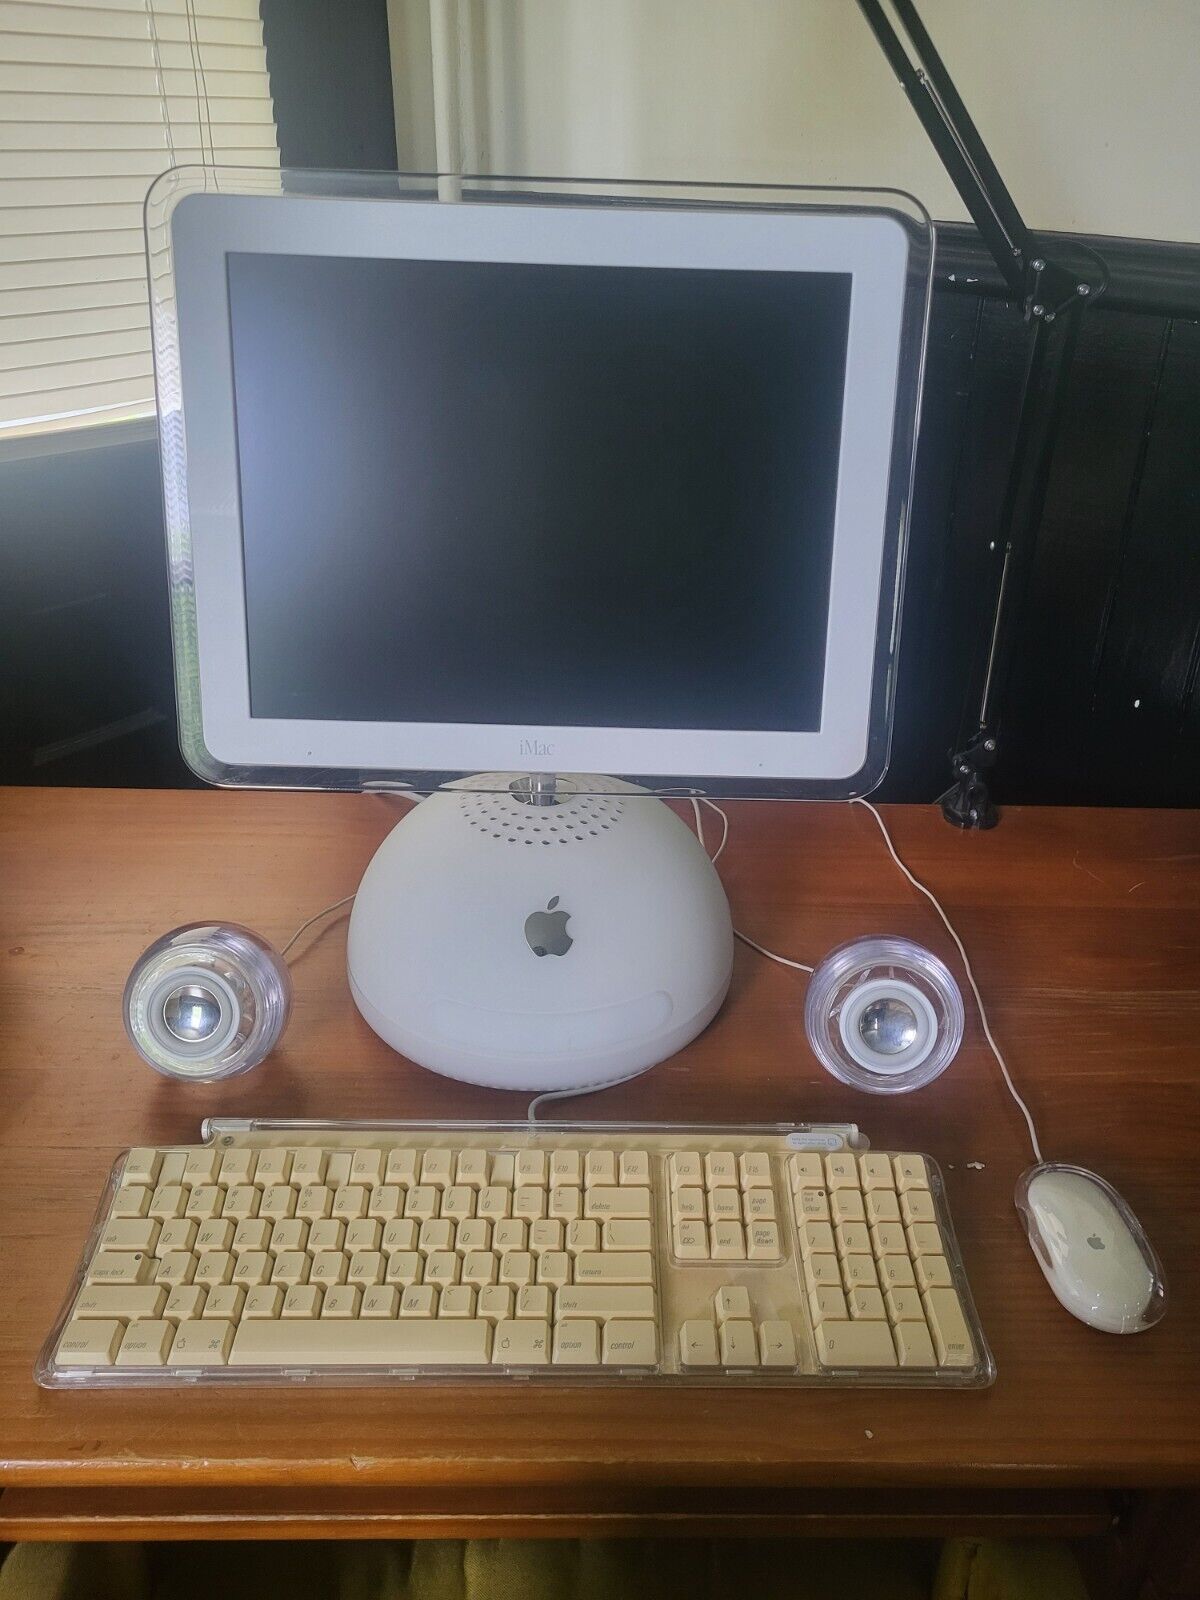 Vintage Apple iMac 15” G4 All In One Desktop Computer Tested (See Last Picture)